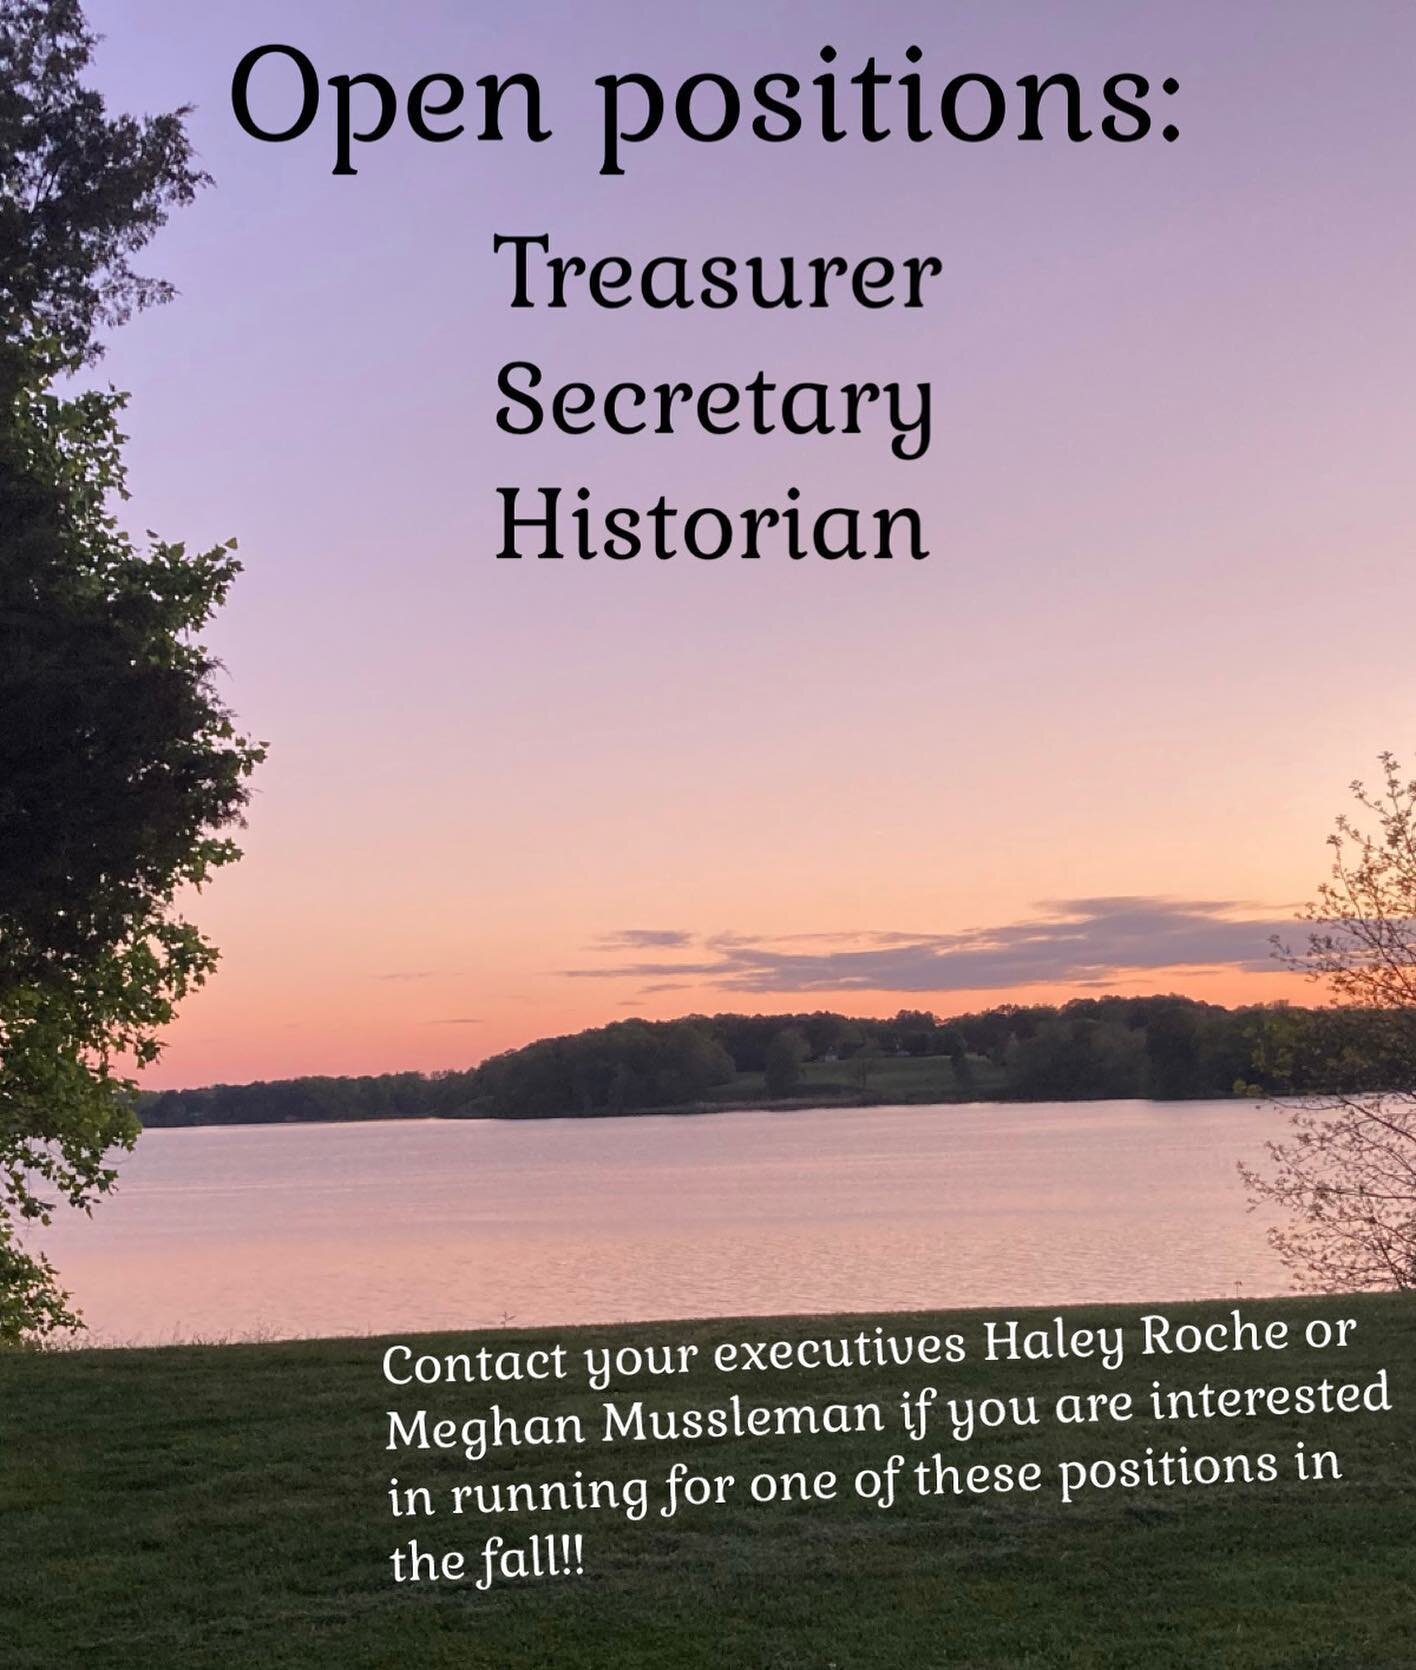 We still need a treasurer, secretary, and historian for next year! Please contact Meghan Mussleman and Haley Roche if your interested in running and we can give you more information!!